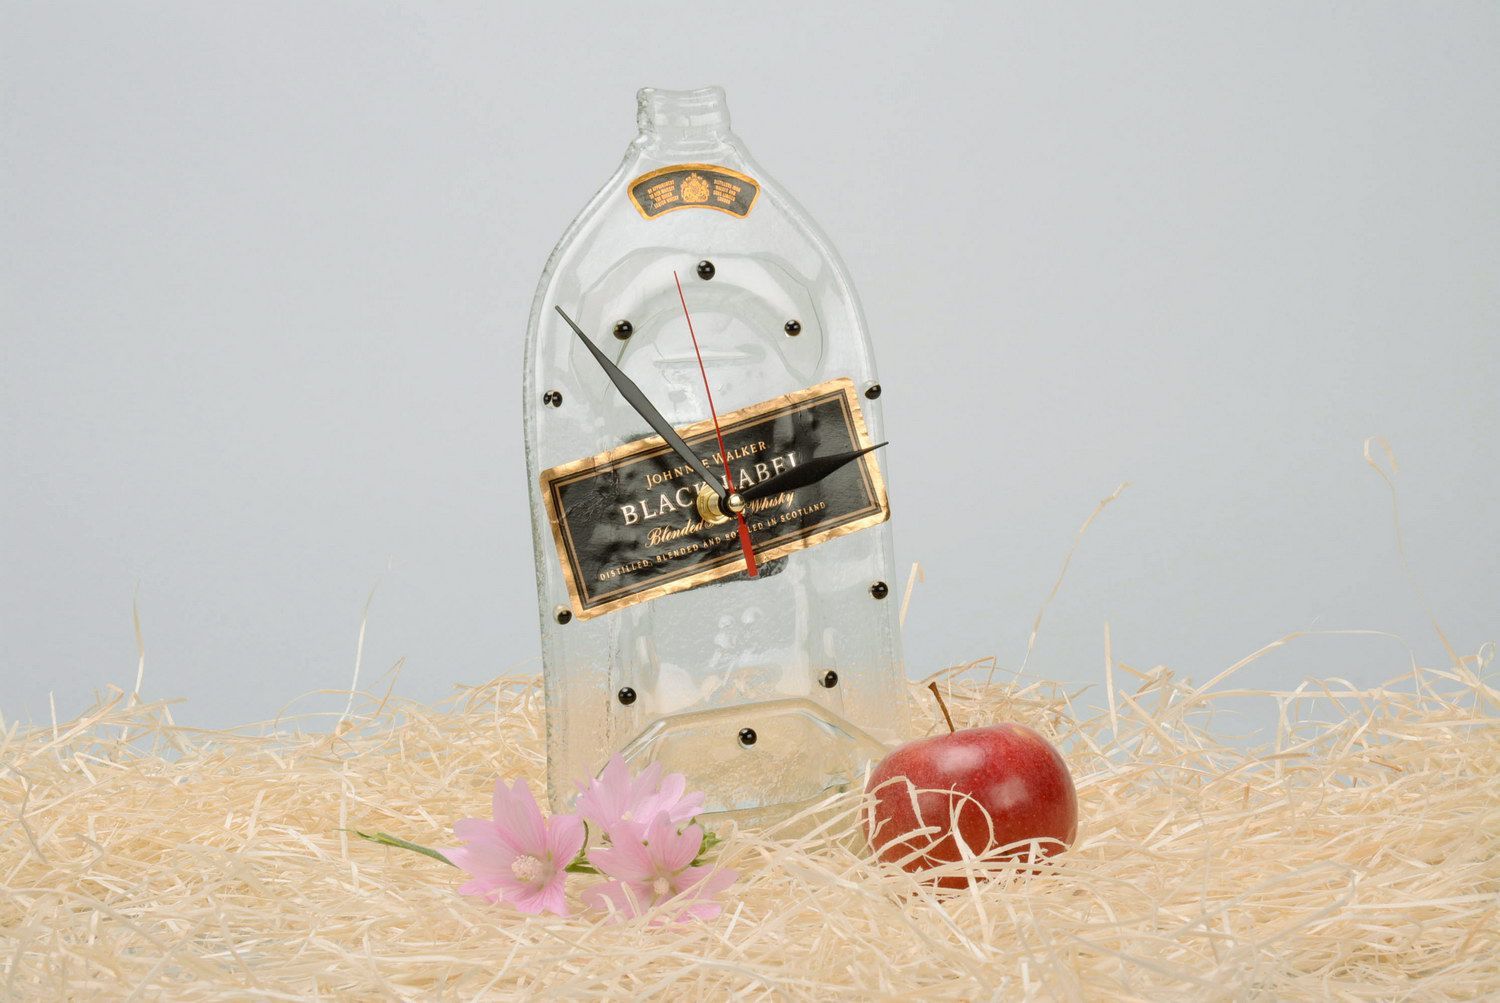 Clock made from bottle Black label photo 4